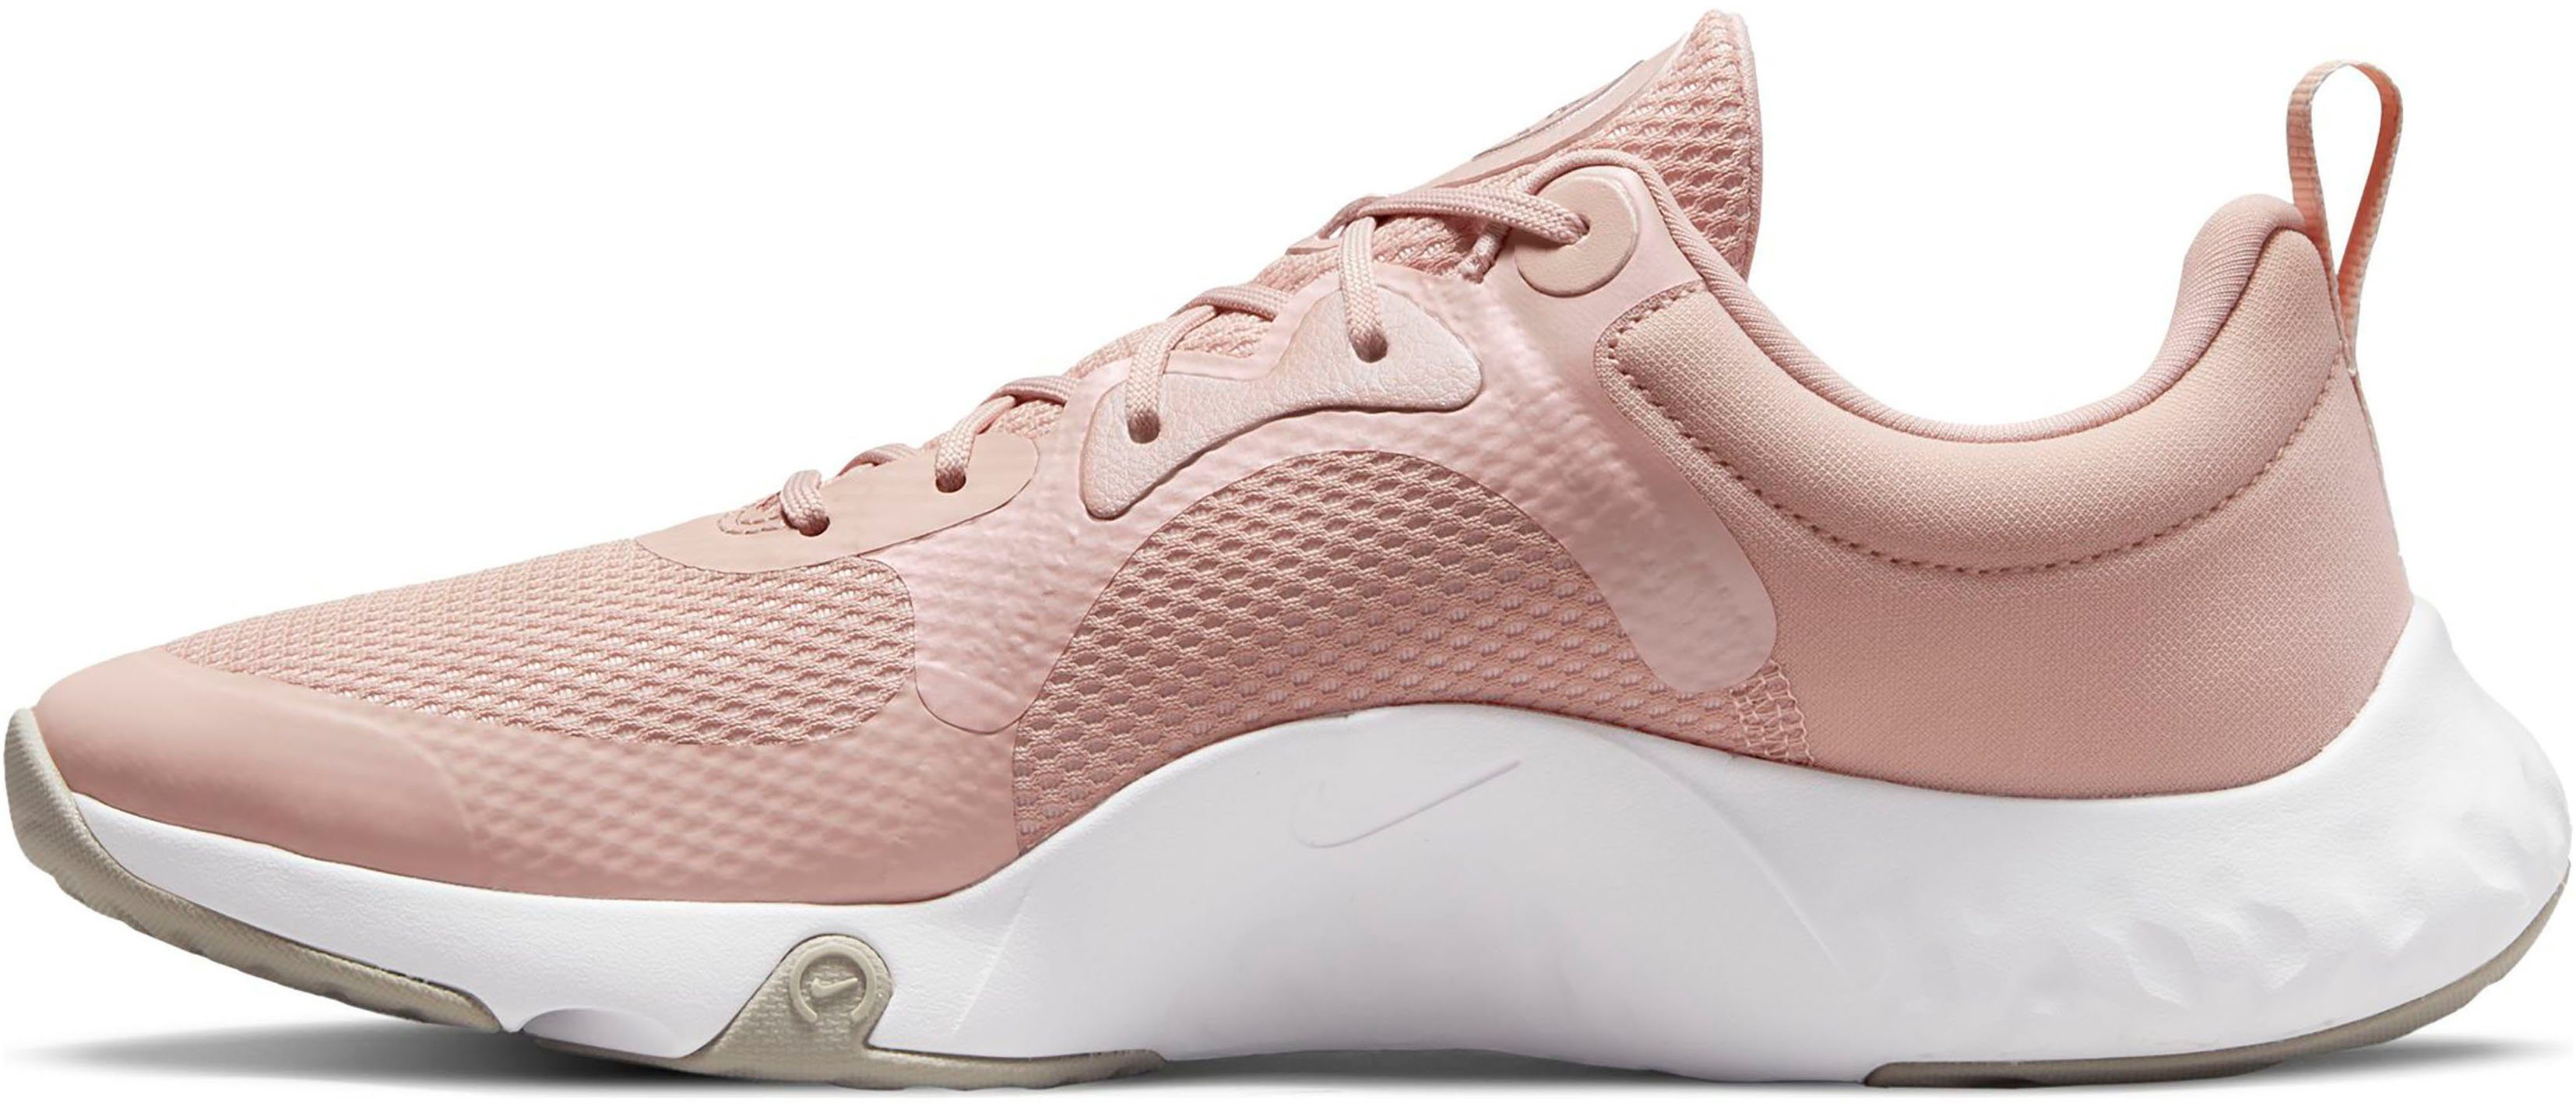 Nike RENEW IN-SEASON TR 11 PINK-OXFORD-MTLC-PEWTER-PALE-CORAL-WHITE Fitnessschuh